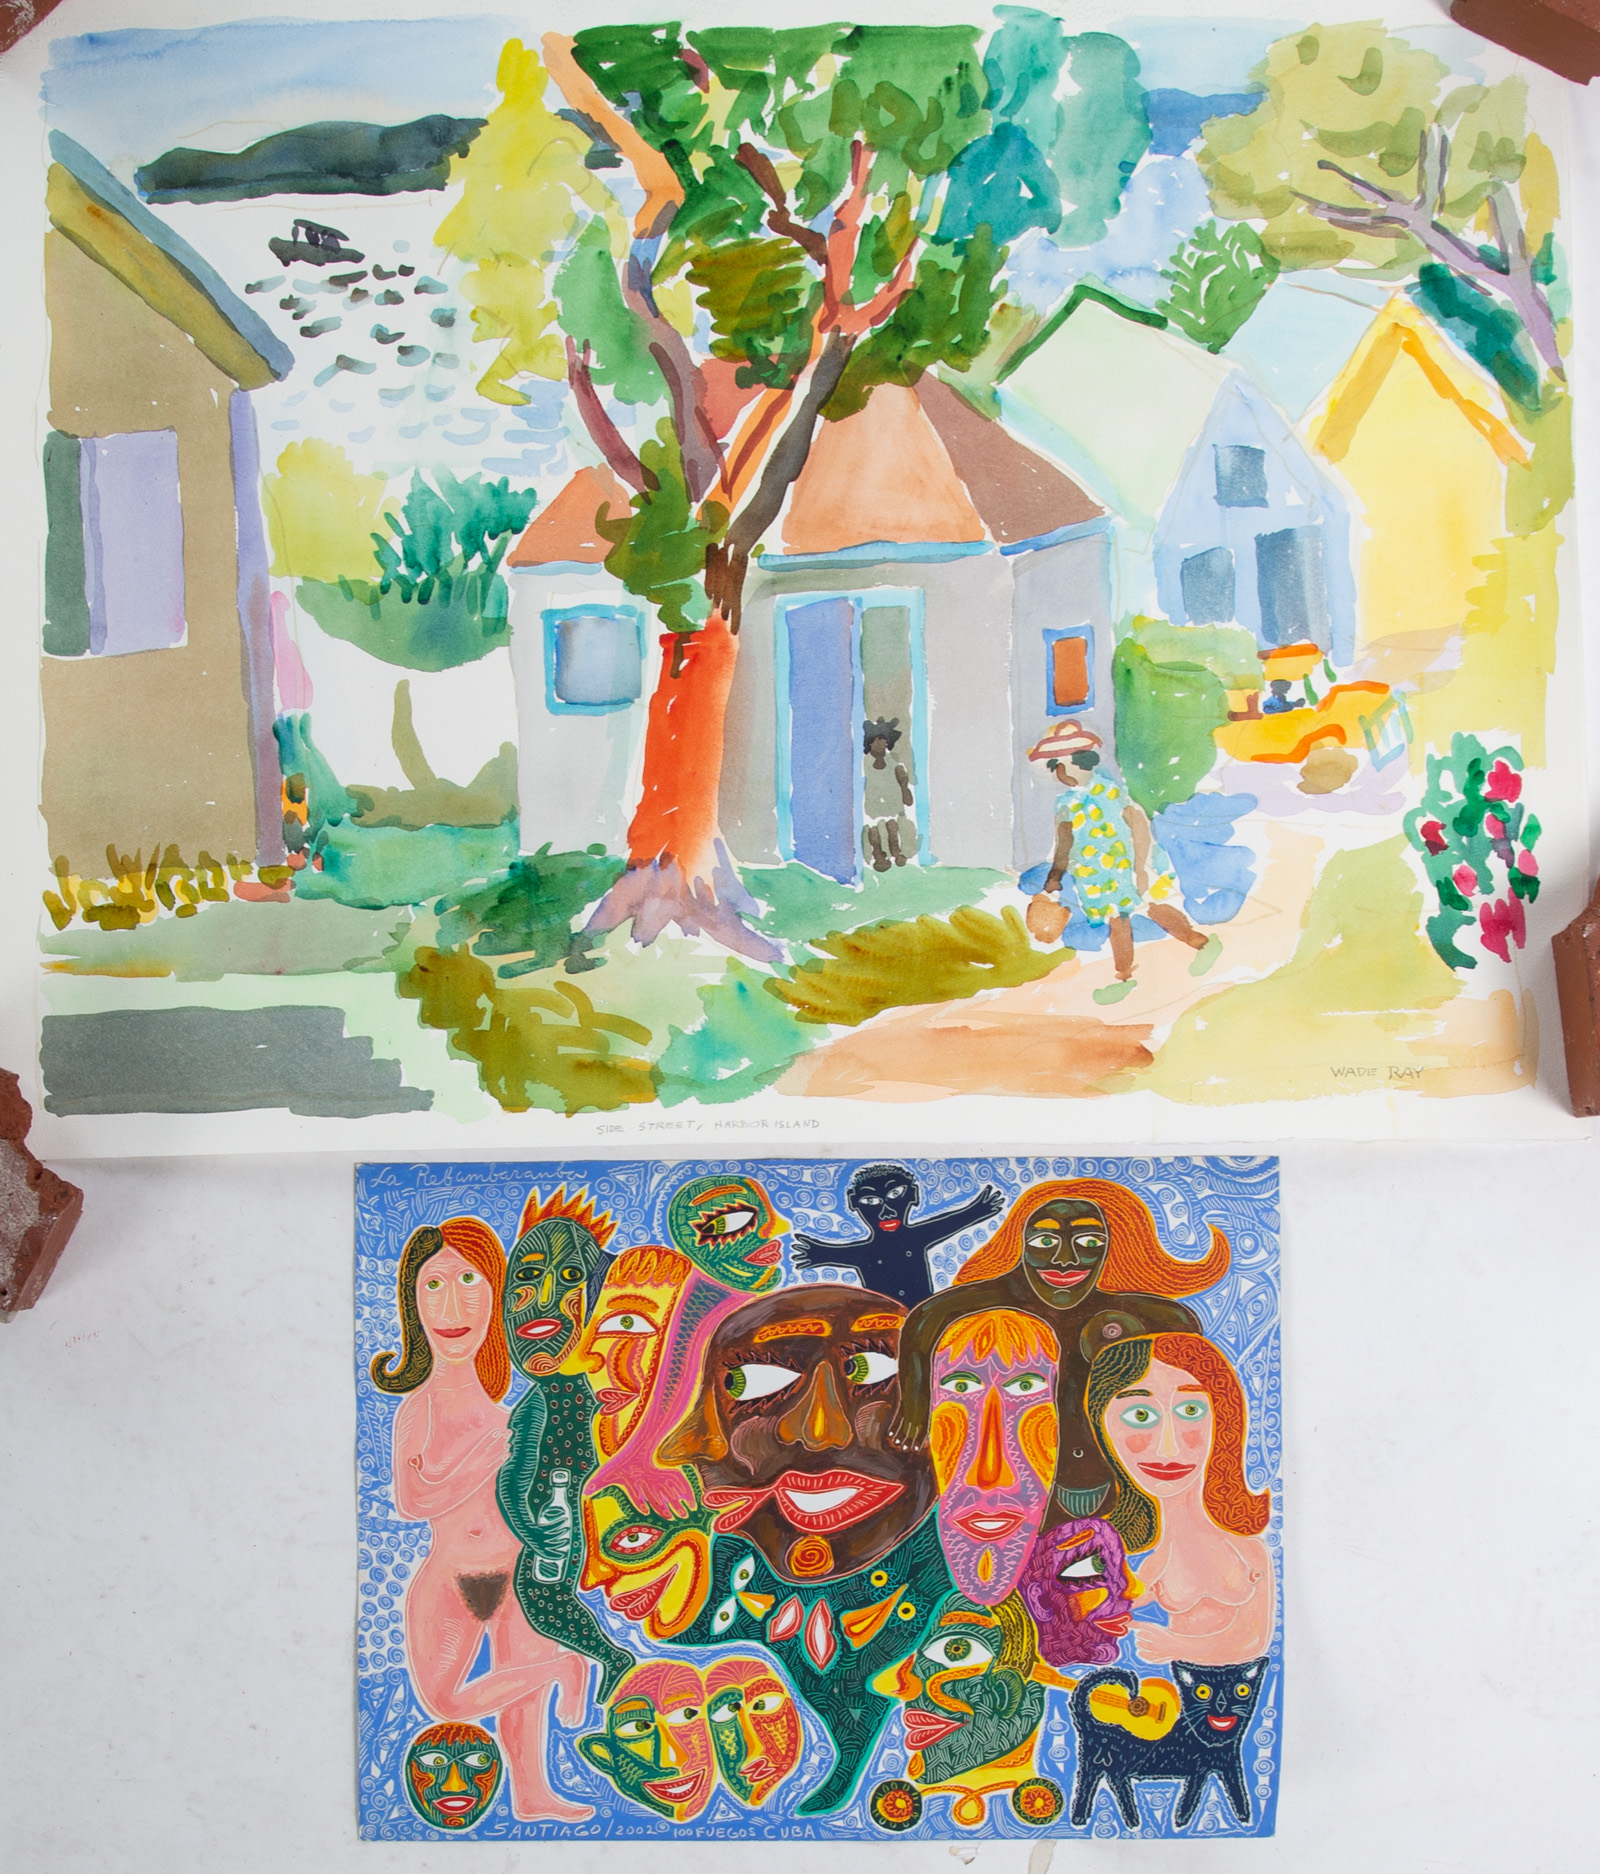 TWO BRIGHTLY COLORED WORKS ON PAPER